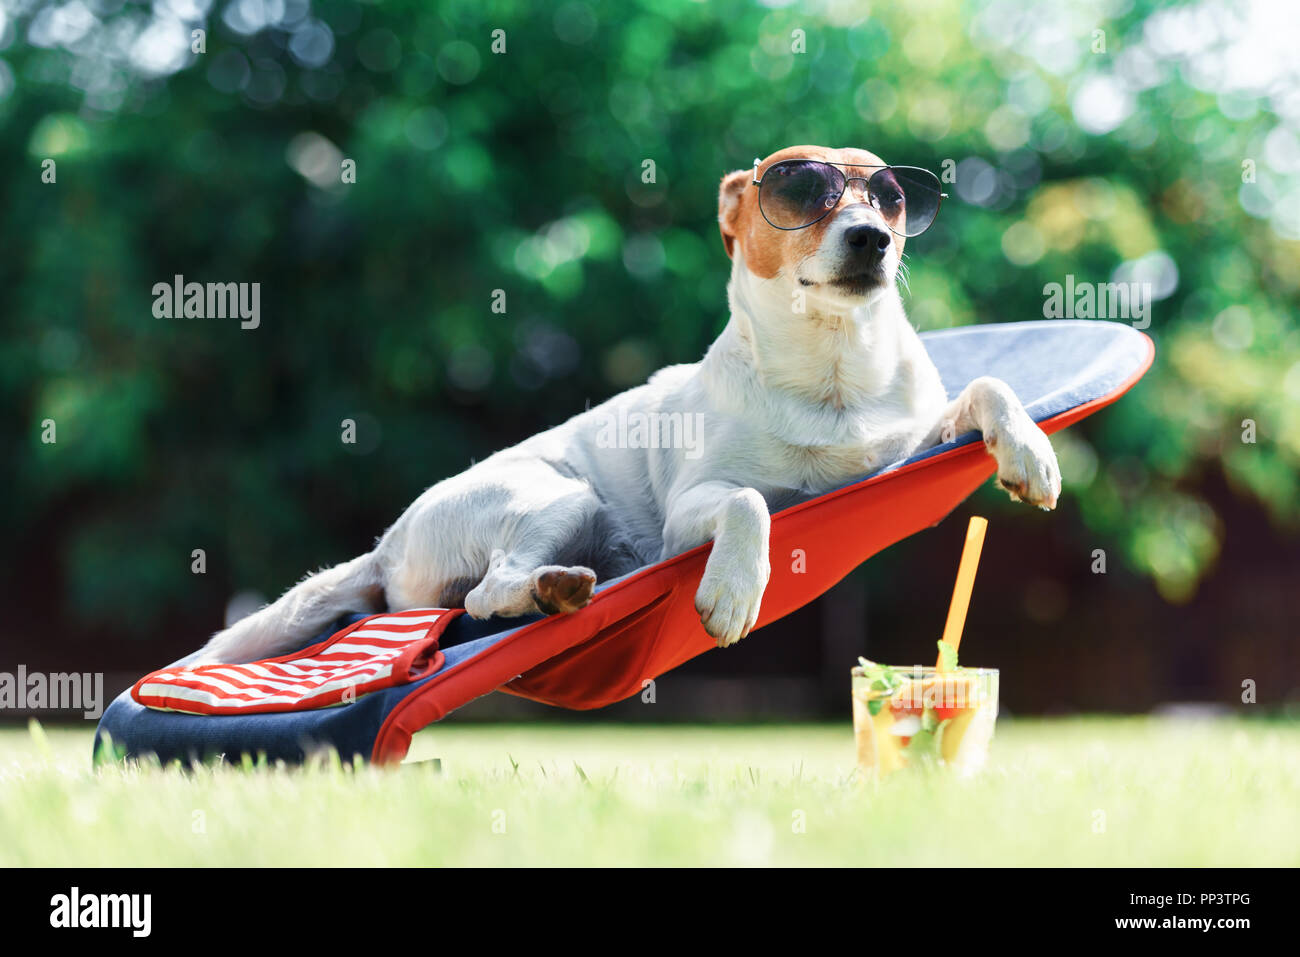 Jack russel terrier dog lies on a deck-chair in sunglasses. Relax and vacation concept Stock Photo